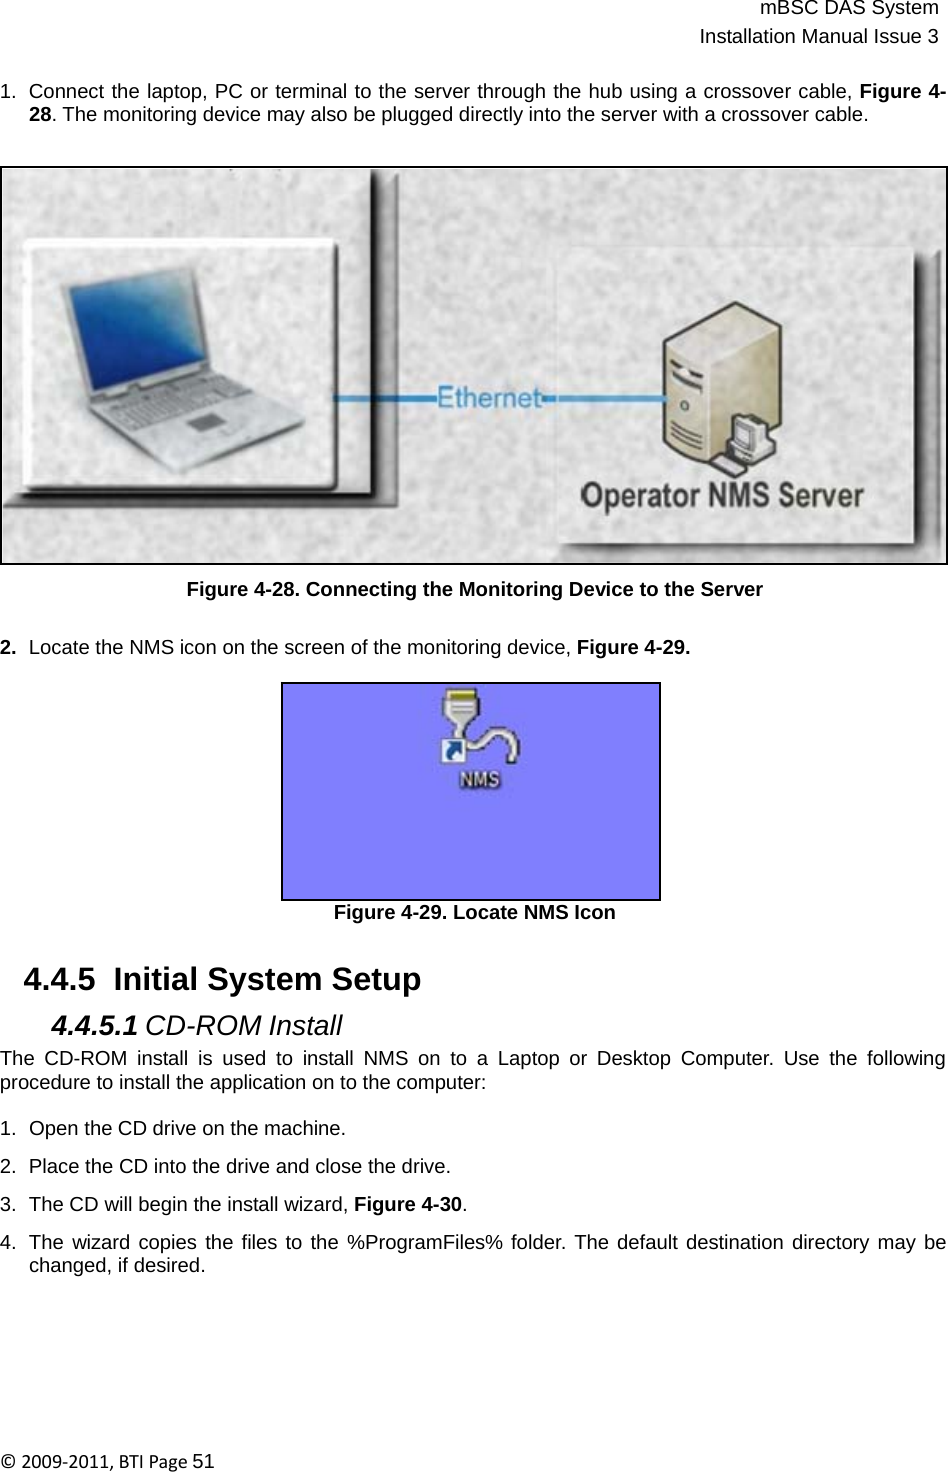 mBSC DAS SystemInstallation Manual Issue 3©2009‐2011,BTIPage51   1.  Connect the laptop, PC or terminal to the server through the hub using a crossover cable, Figure 4- 28. The monitoring device may also be plugged directly into the server with a crossover cable.                       Figure 4-28. Connecting the Monitoring Device to the Server   2.  Locate the NMS icon on the screen of the monitoring device, Figure 4-29.             Figure 4-29. Locate NMS Icon   4.4.5  Initial System Setup  4.4.5.1 CD-ROM Install The CD-ROM install is used to install NMS on to a Laptop or Desktop Computer. Use the following procedure to install the application on to the computer:  1.  Open the CD drive on the machine.  2.  Place the CD into the drive and close the drive.  3.  The CD will begin the install wizard, Figure 4-30.  4.  The wizard copies the files to the %ProgramFiles% folder. The default destination directory may be changed, if desired. 